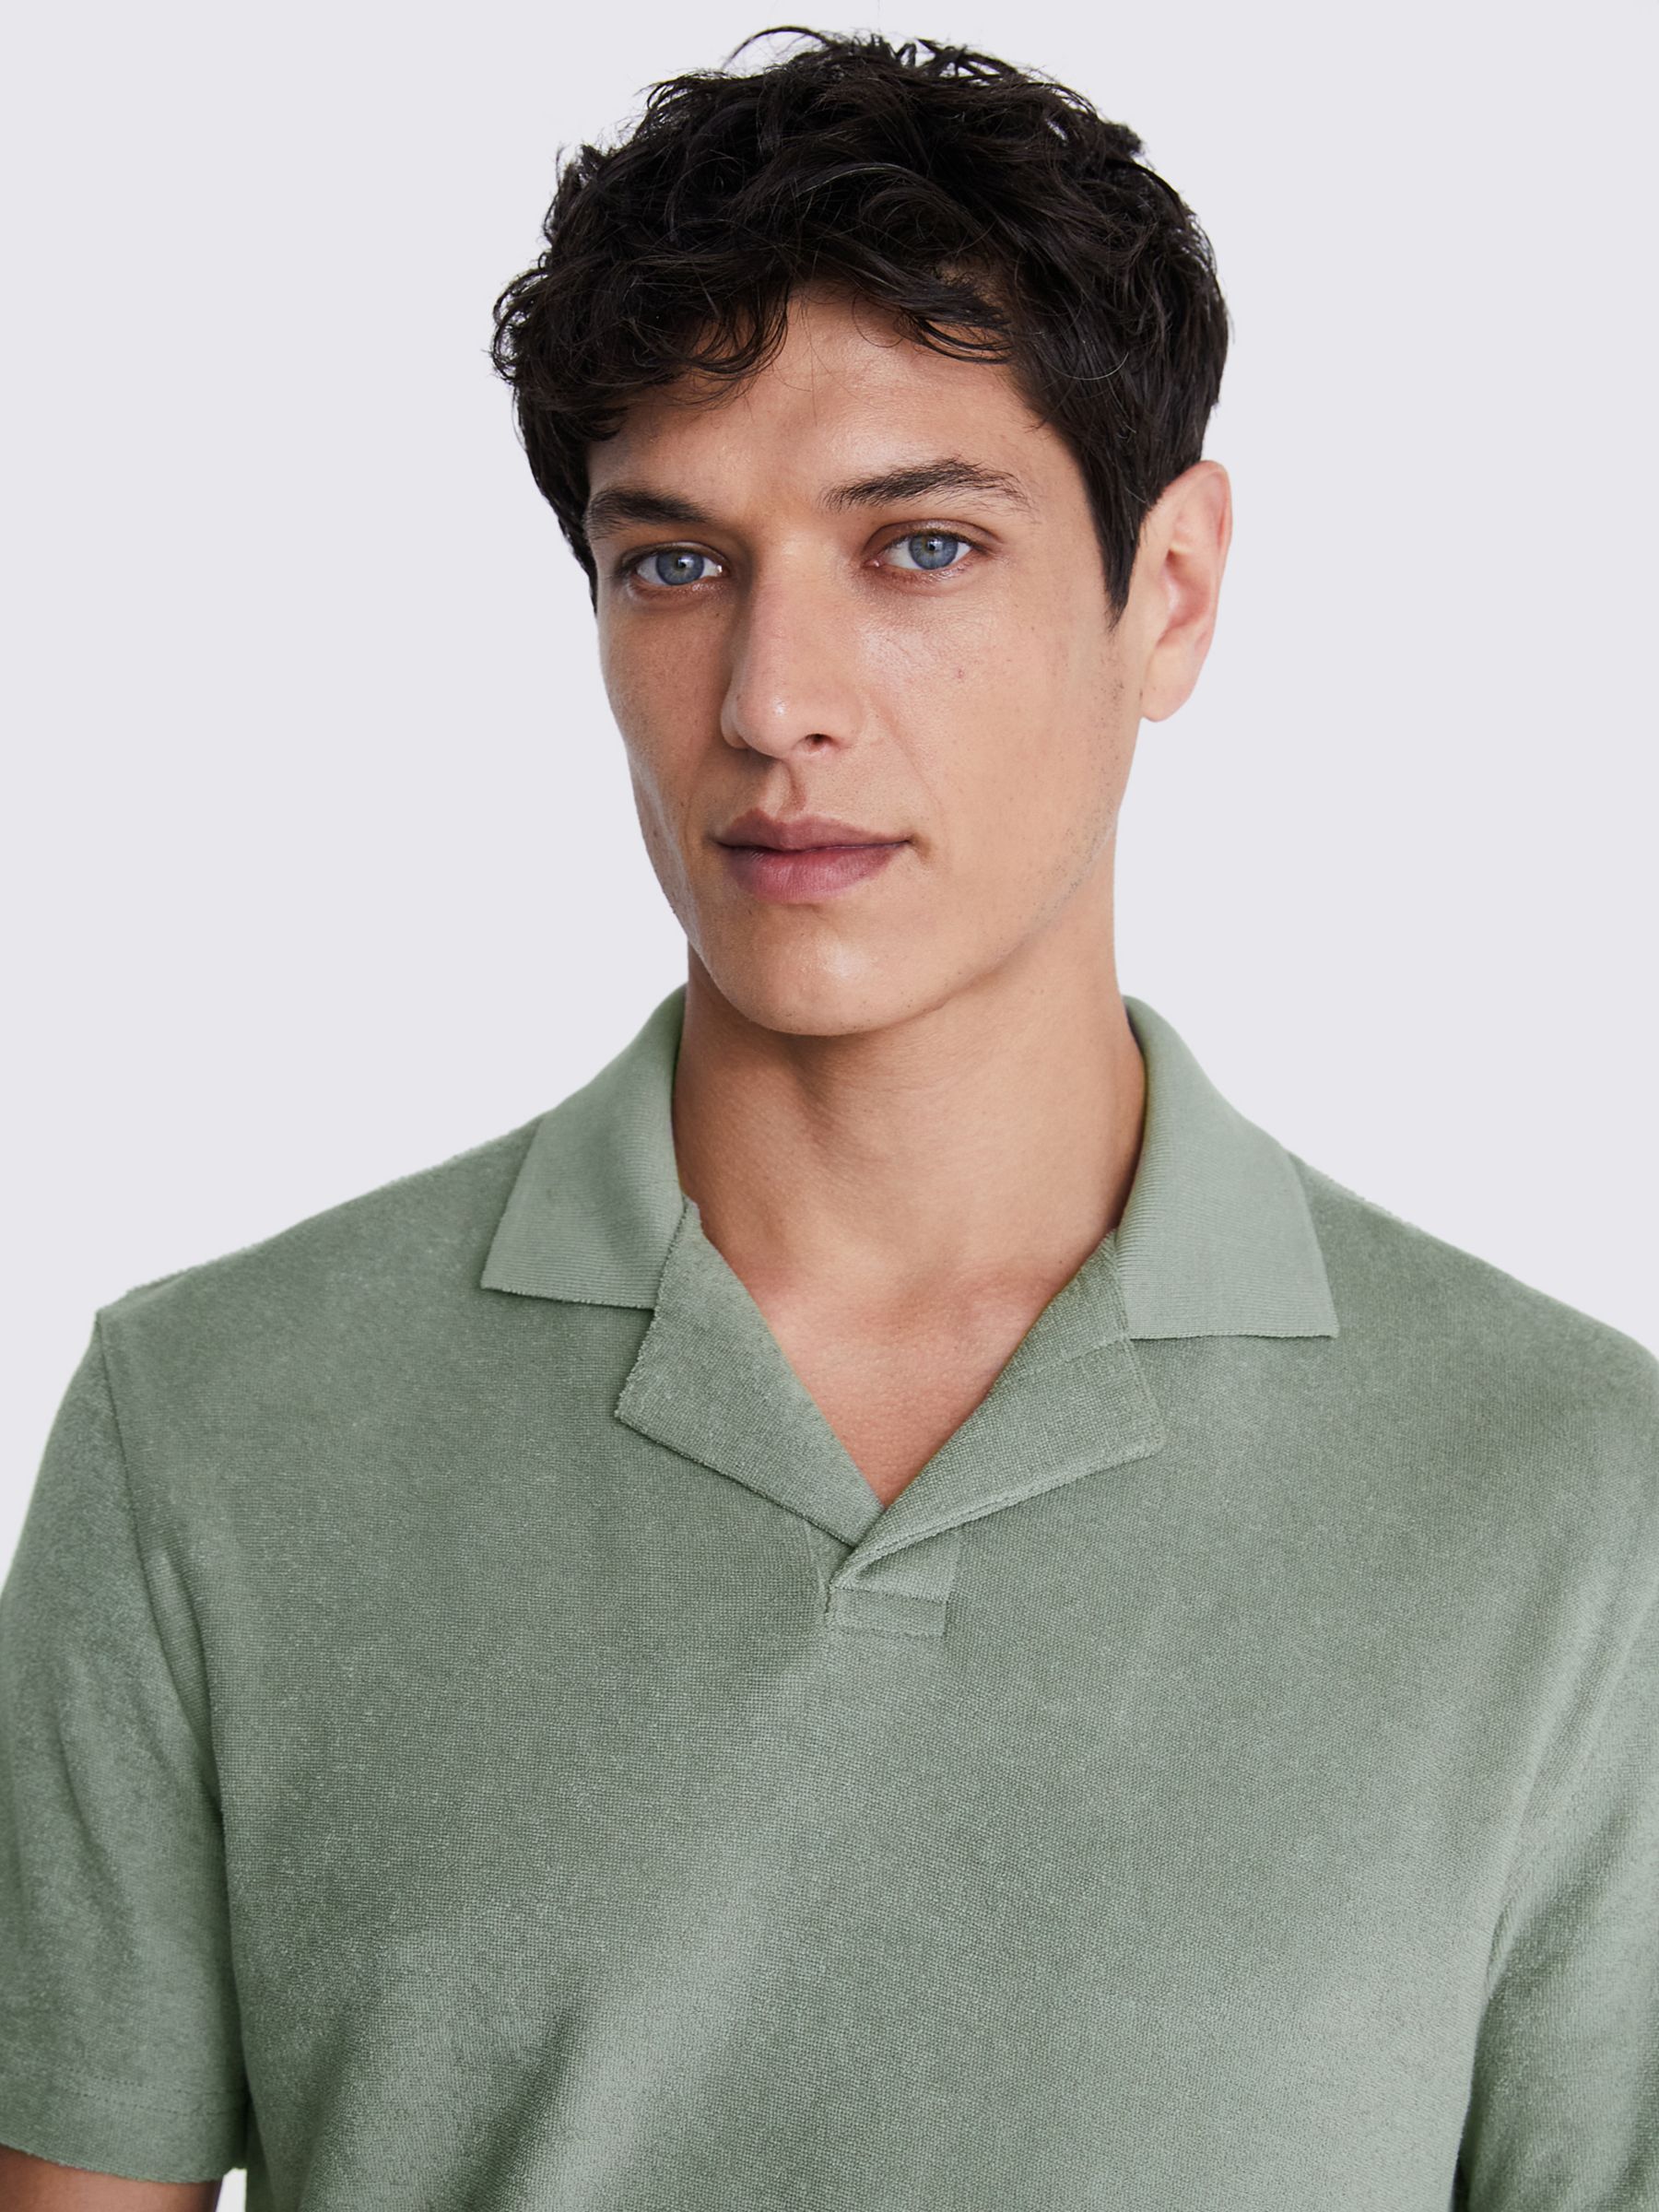 Moss Terry Towelling Skipper Polo Shirt, Sage, L